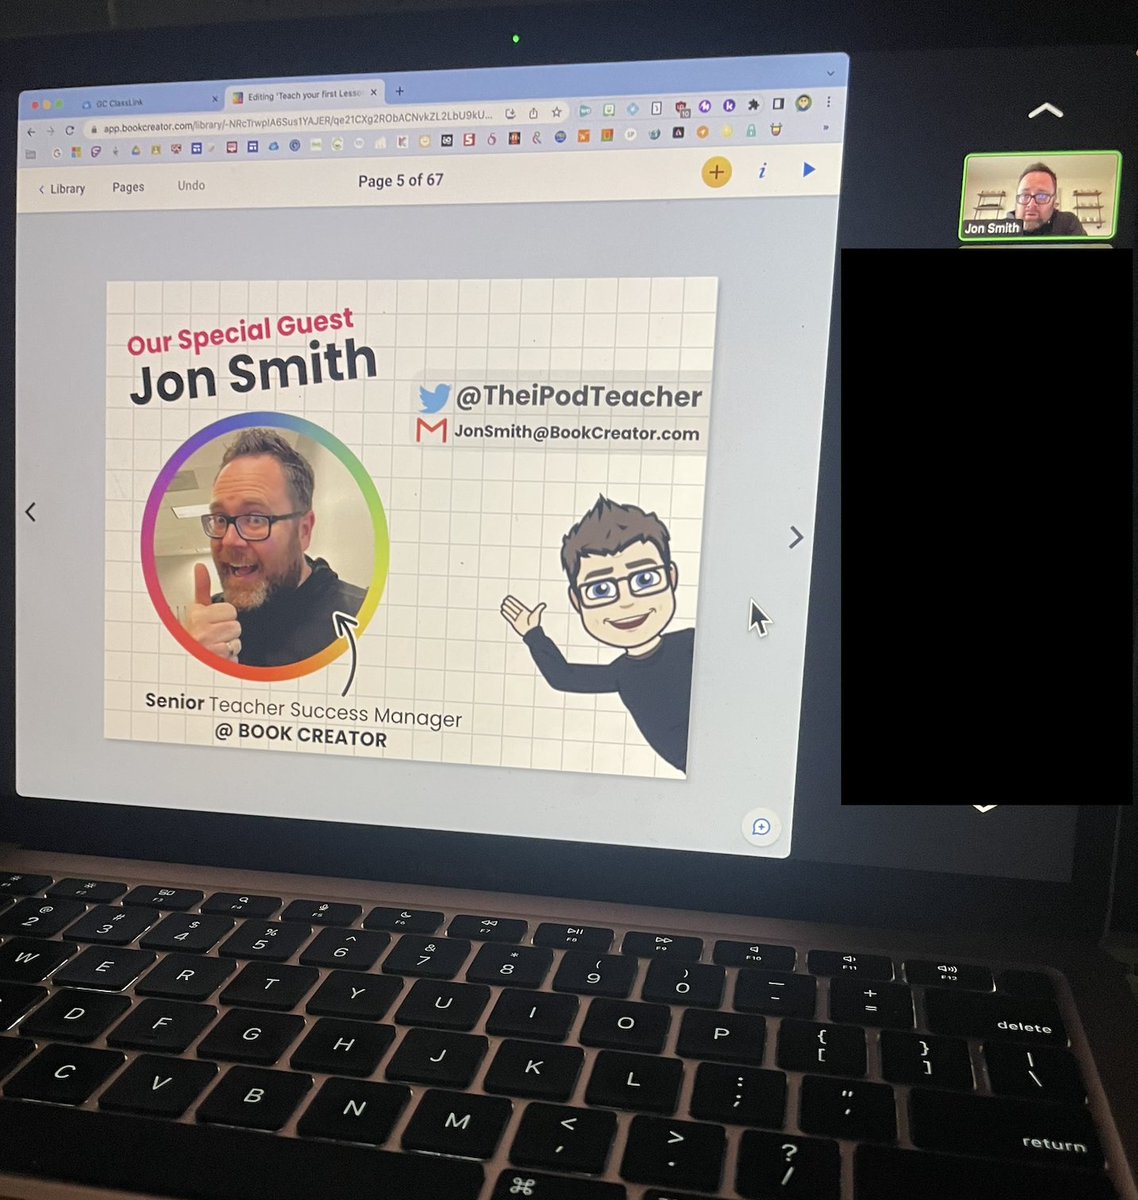 Thank you @GCUFSD teachers for joining our @BookCreatorApp Pajama PD session tonight, featuring special guest Jon Smith (@theipodteacher)! 
Huge shoutout to my amazing co-presenter, Lauren Lavelle (@MrsLavelle), for always being an incredible Pajama PD partner! 🤓👏